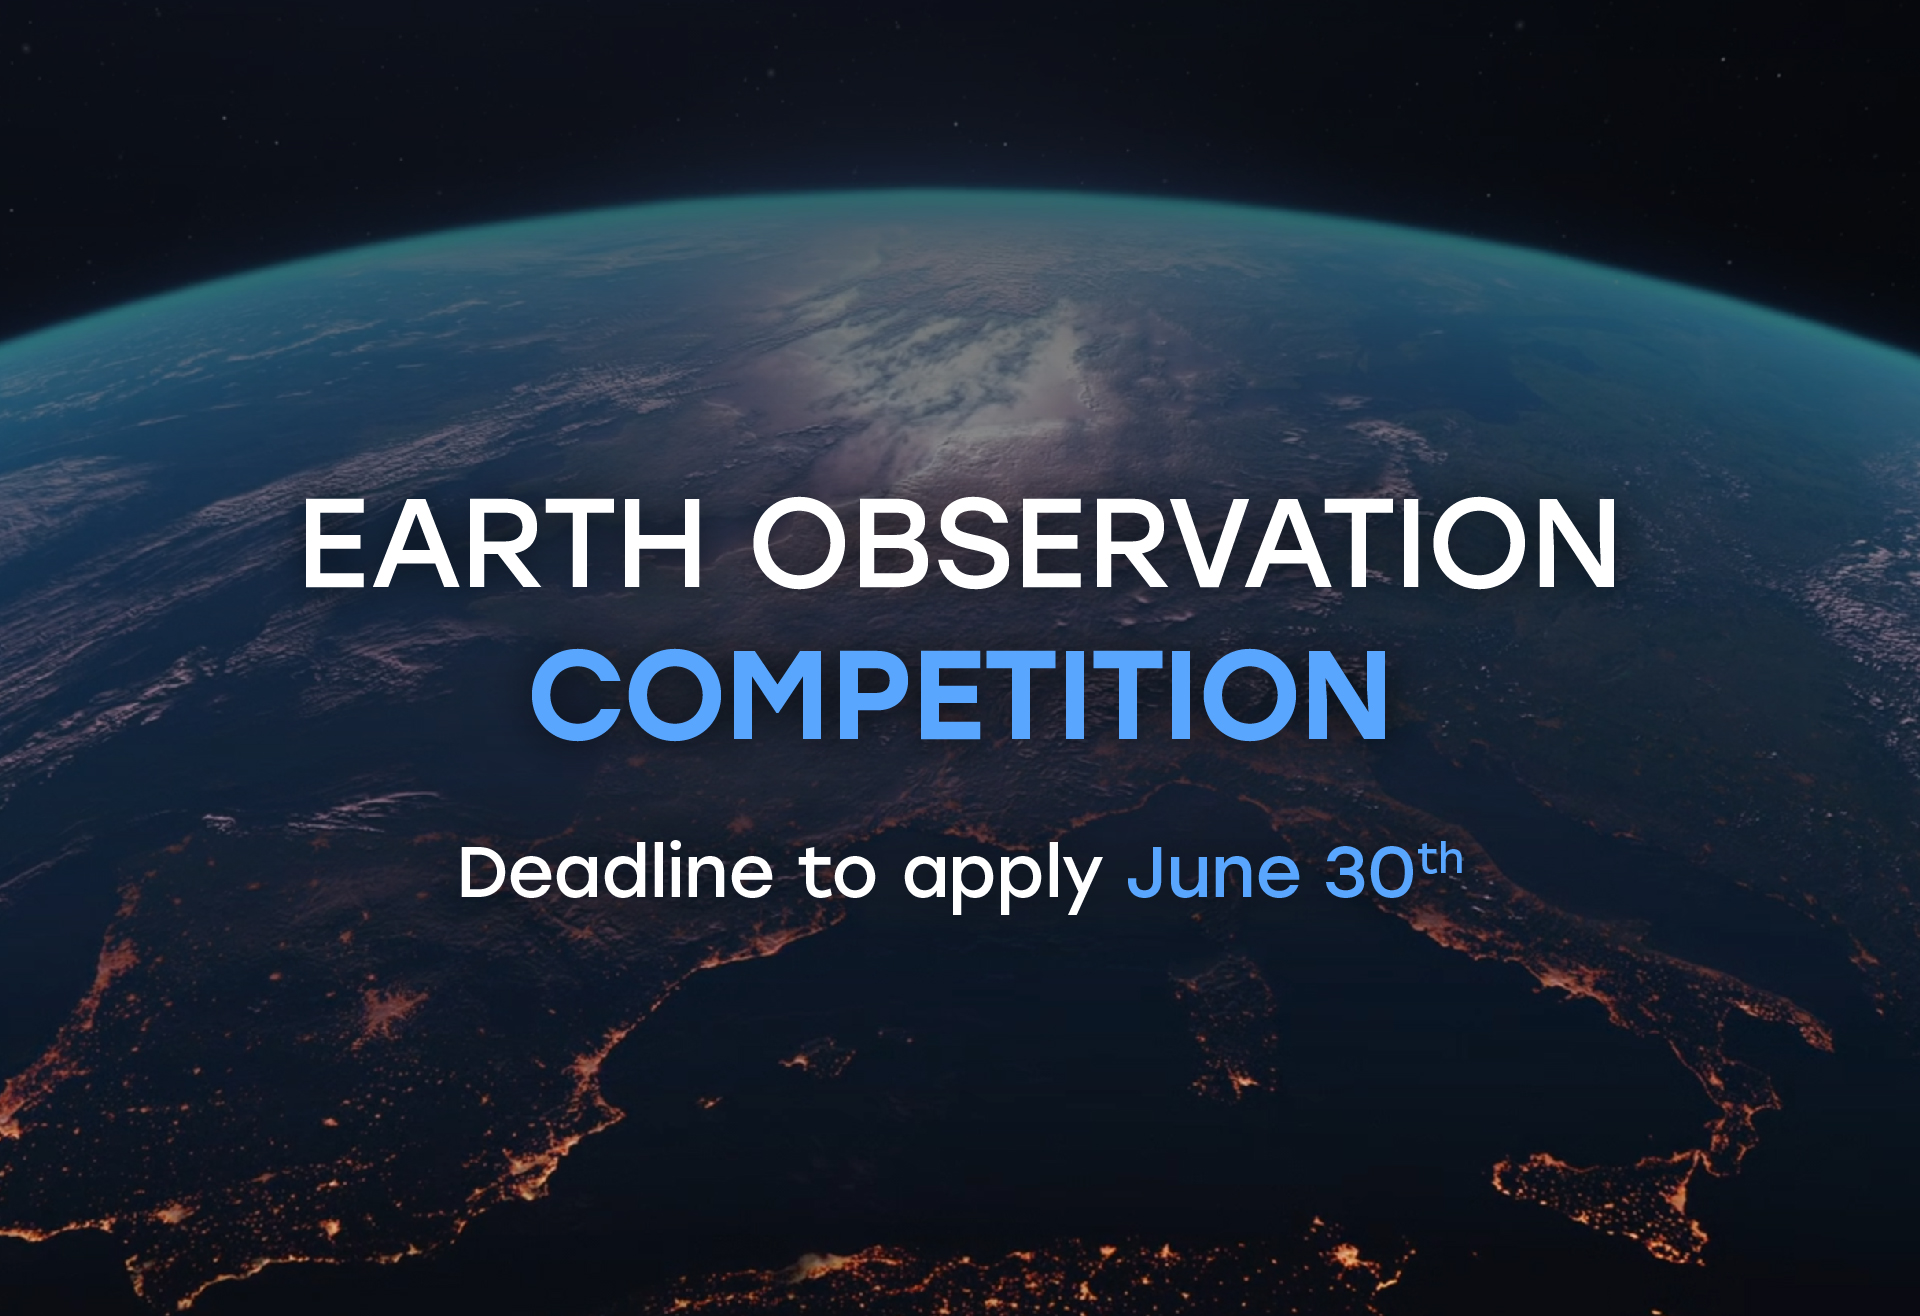 Azercosmos announces a new competition